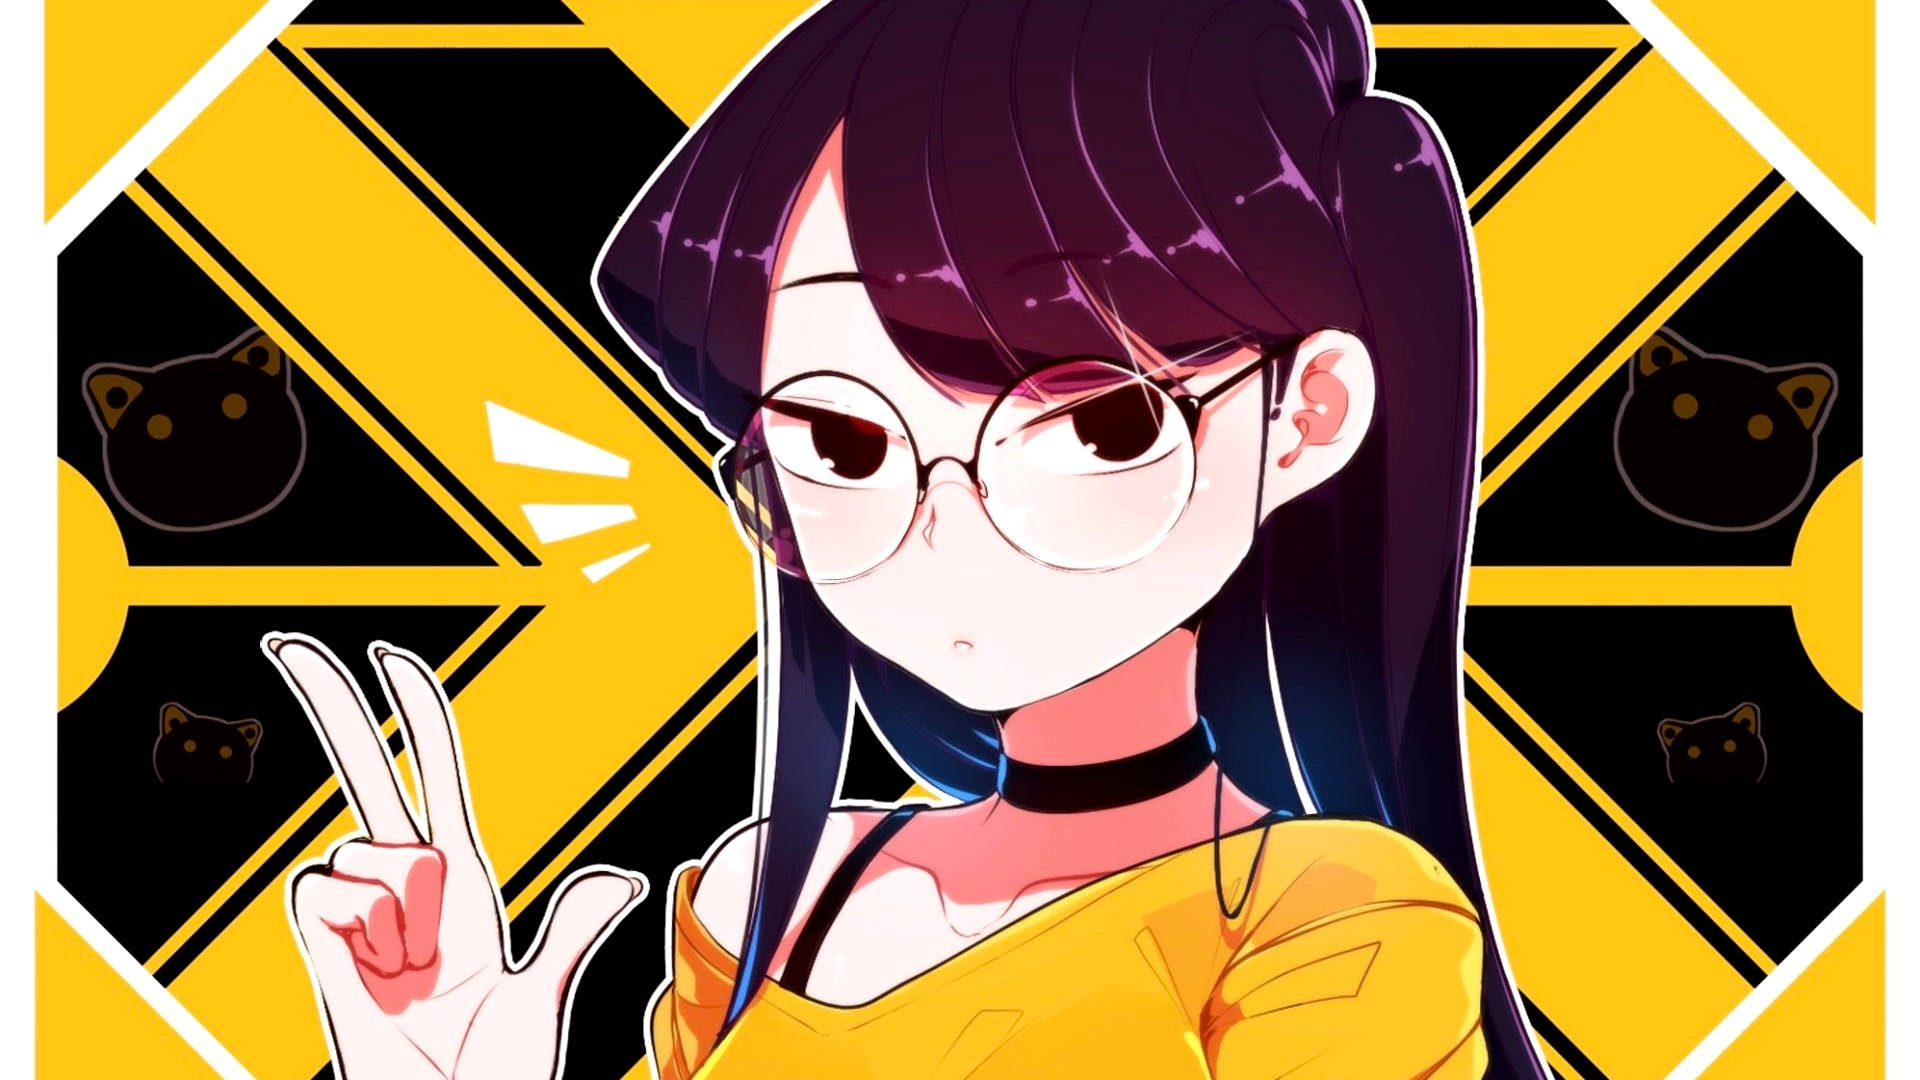 A Girl With Glasses And A Yellow Shirt Wallpaper